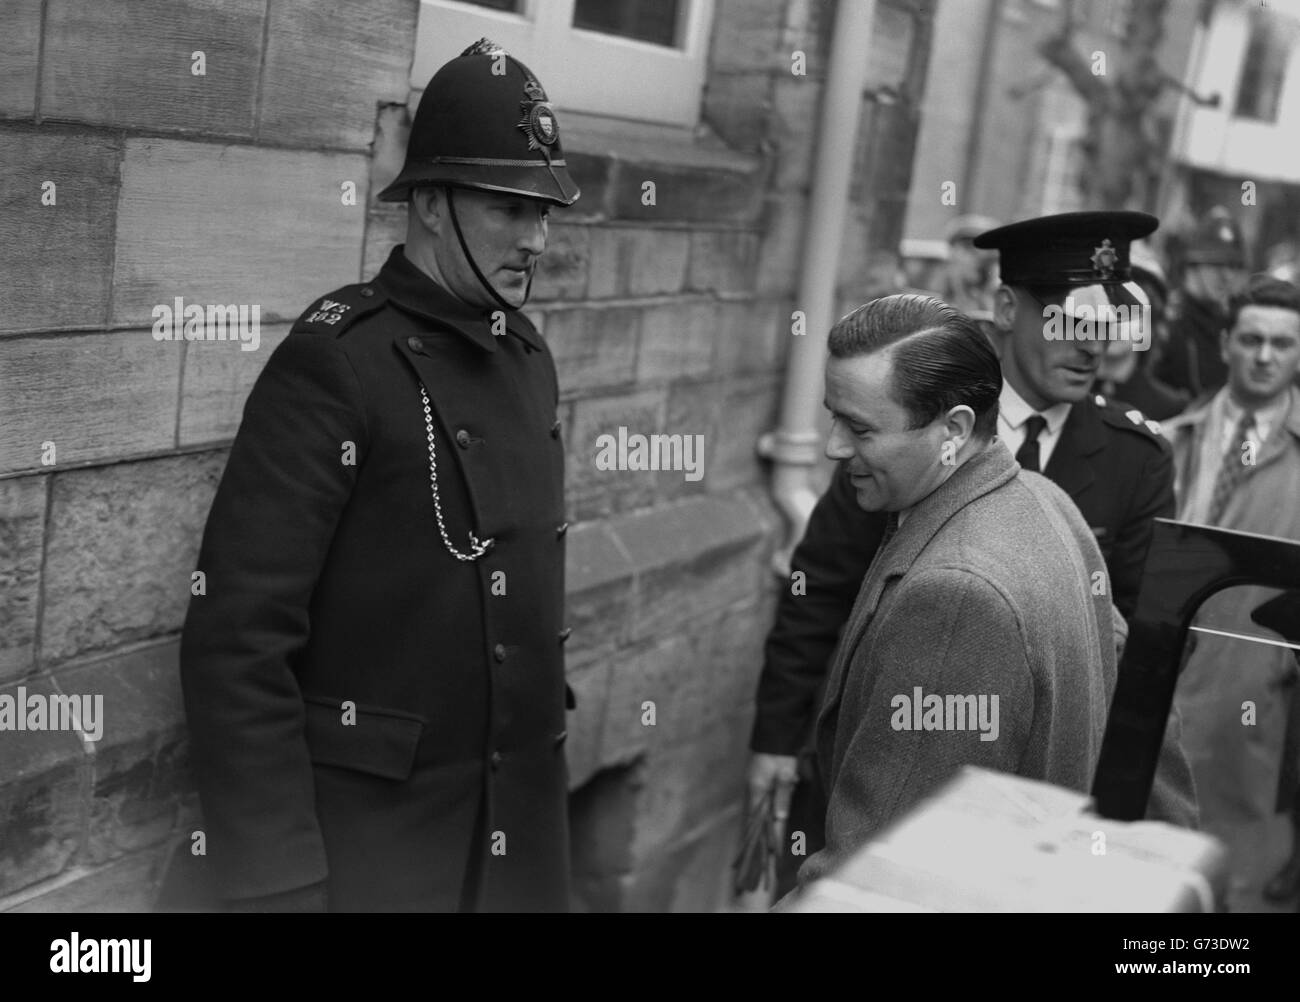 John George Haigh arriving under police escort at Horsham Magistrates' Court. The 39-year-old company director is being tried for the murder of Mrs Olive Durand-Deacon, one of the victims of the so-called 'Acid Bath Murders'. Stock Photo